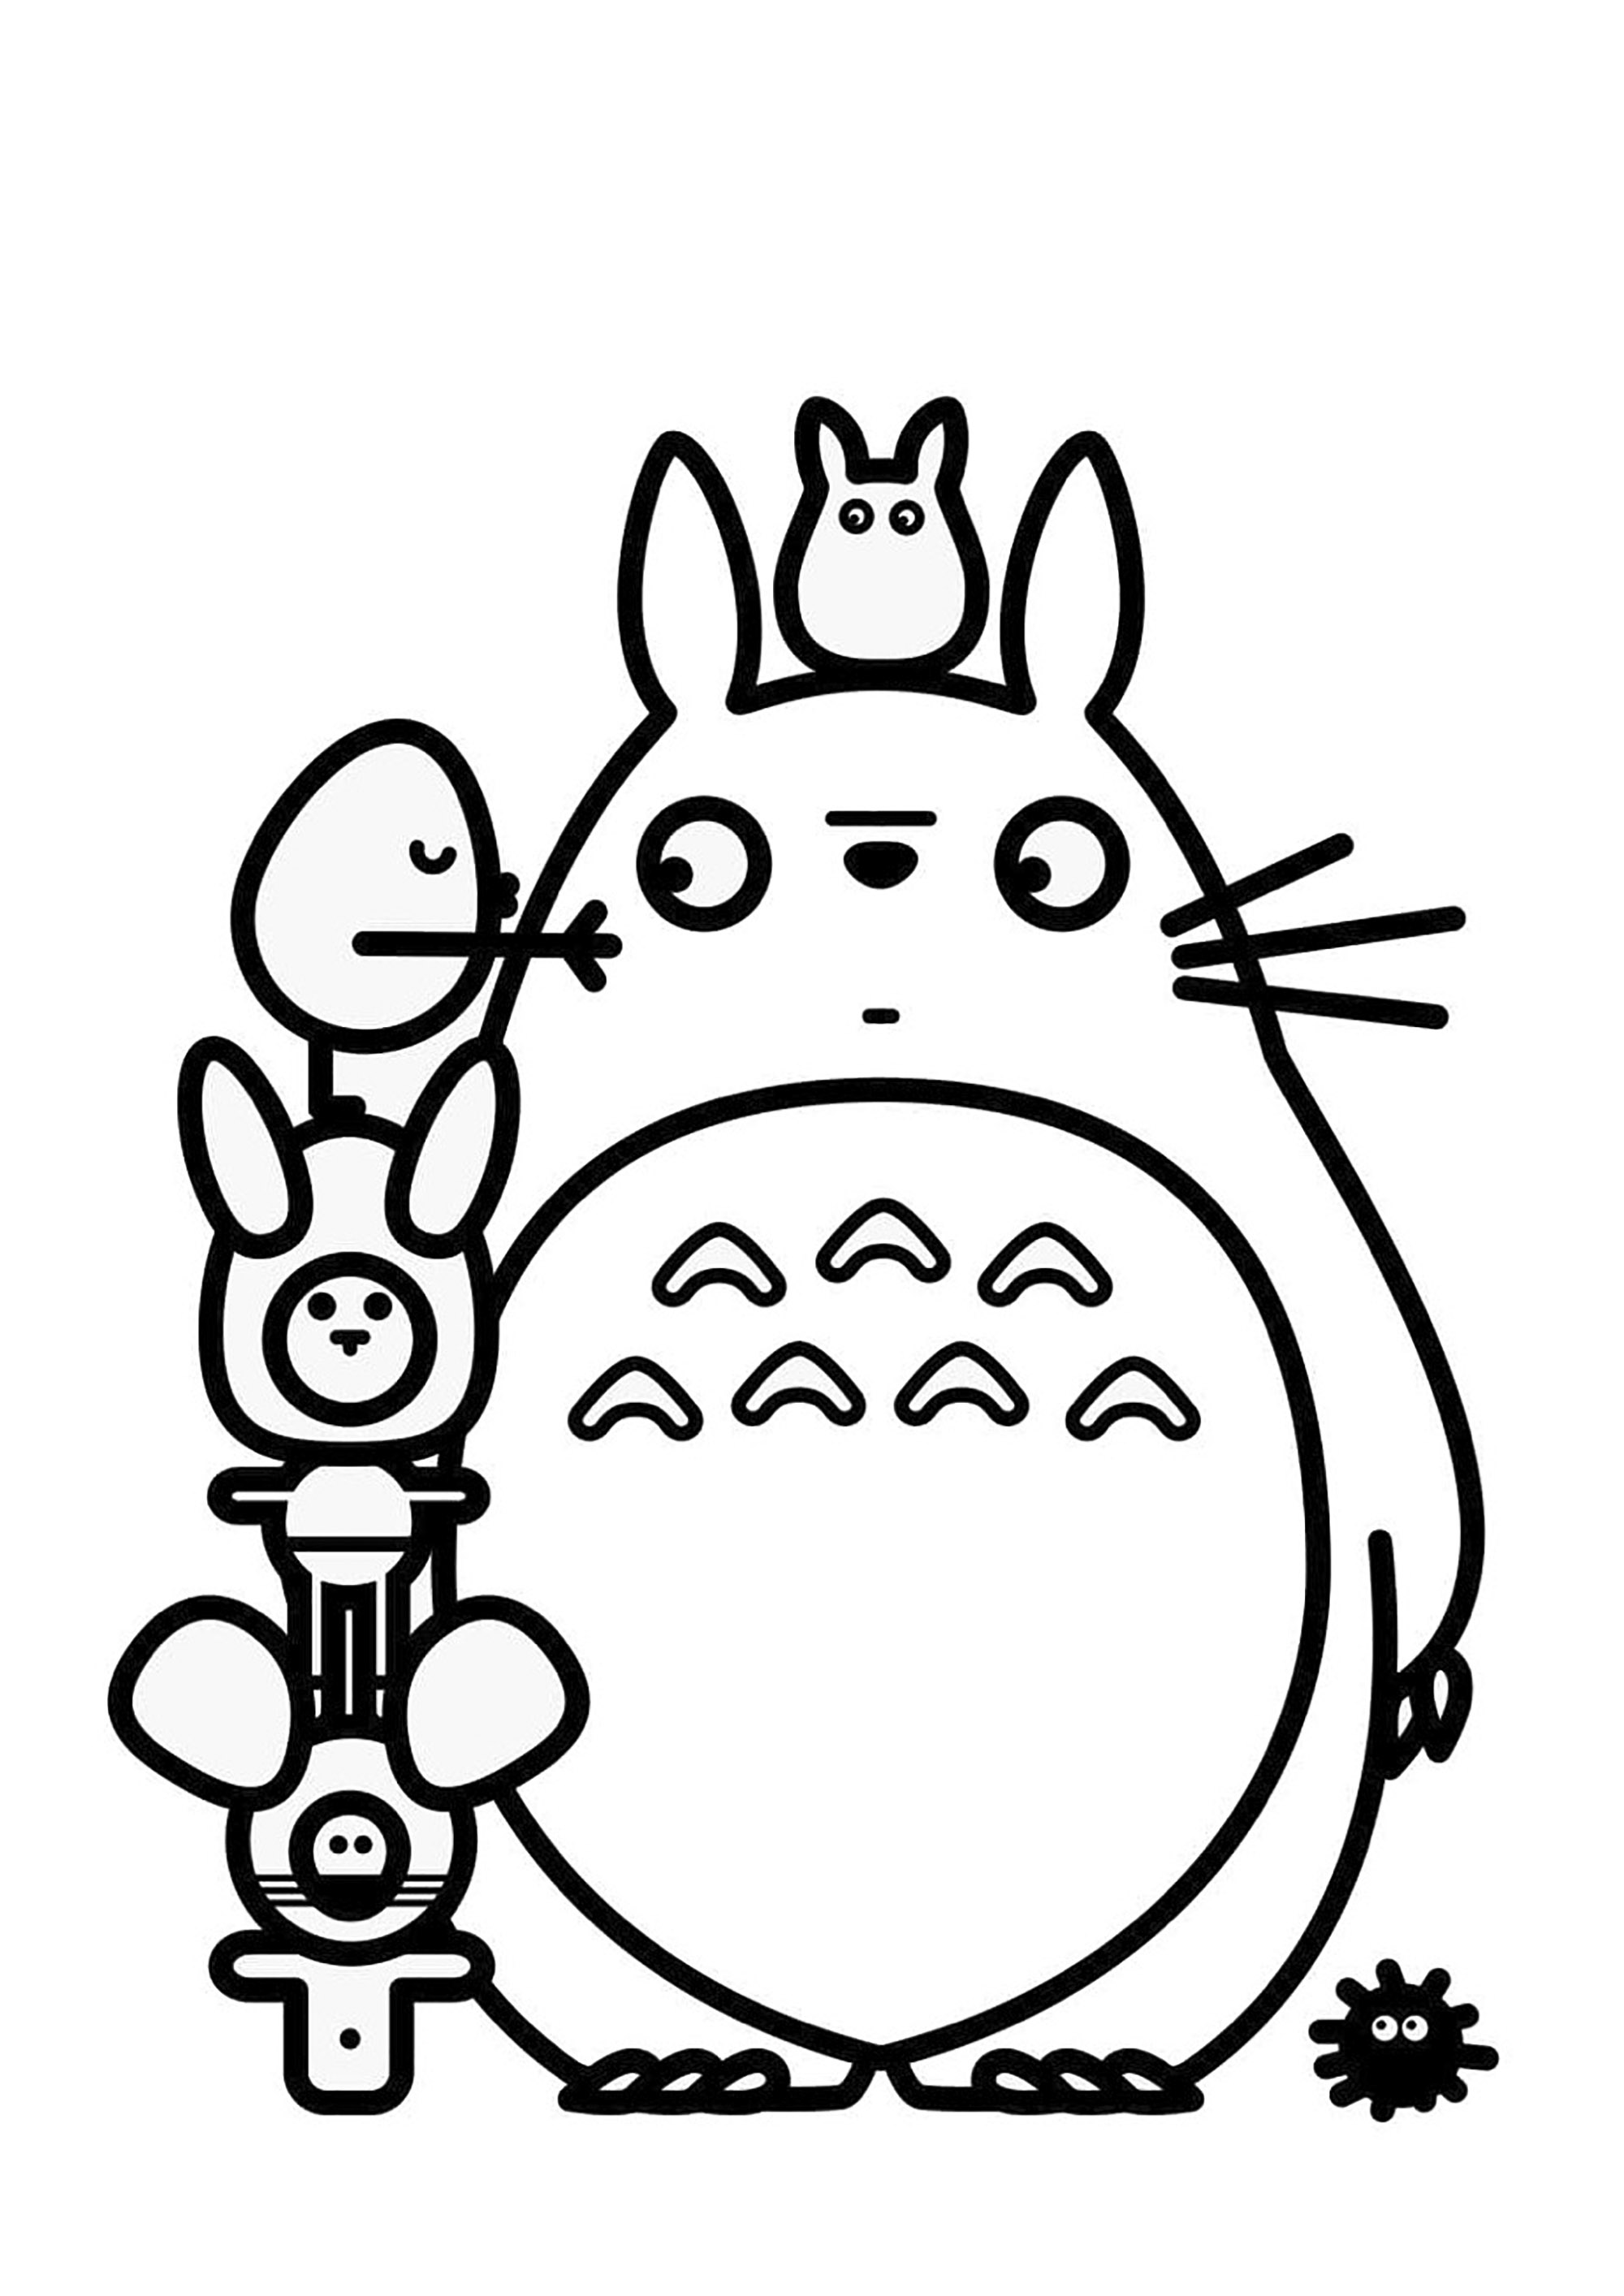 Totoro coloring pages with thick lines. Totoro is a fictional character created in 1988 by Hayao Miyazaki of Studio Ghibli, for the film My Neighbor Totoro.